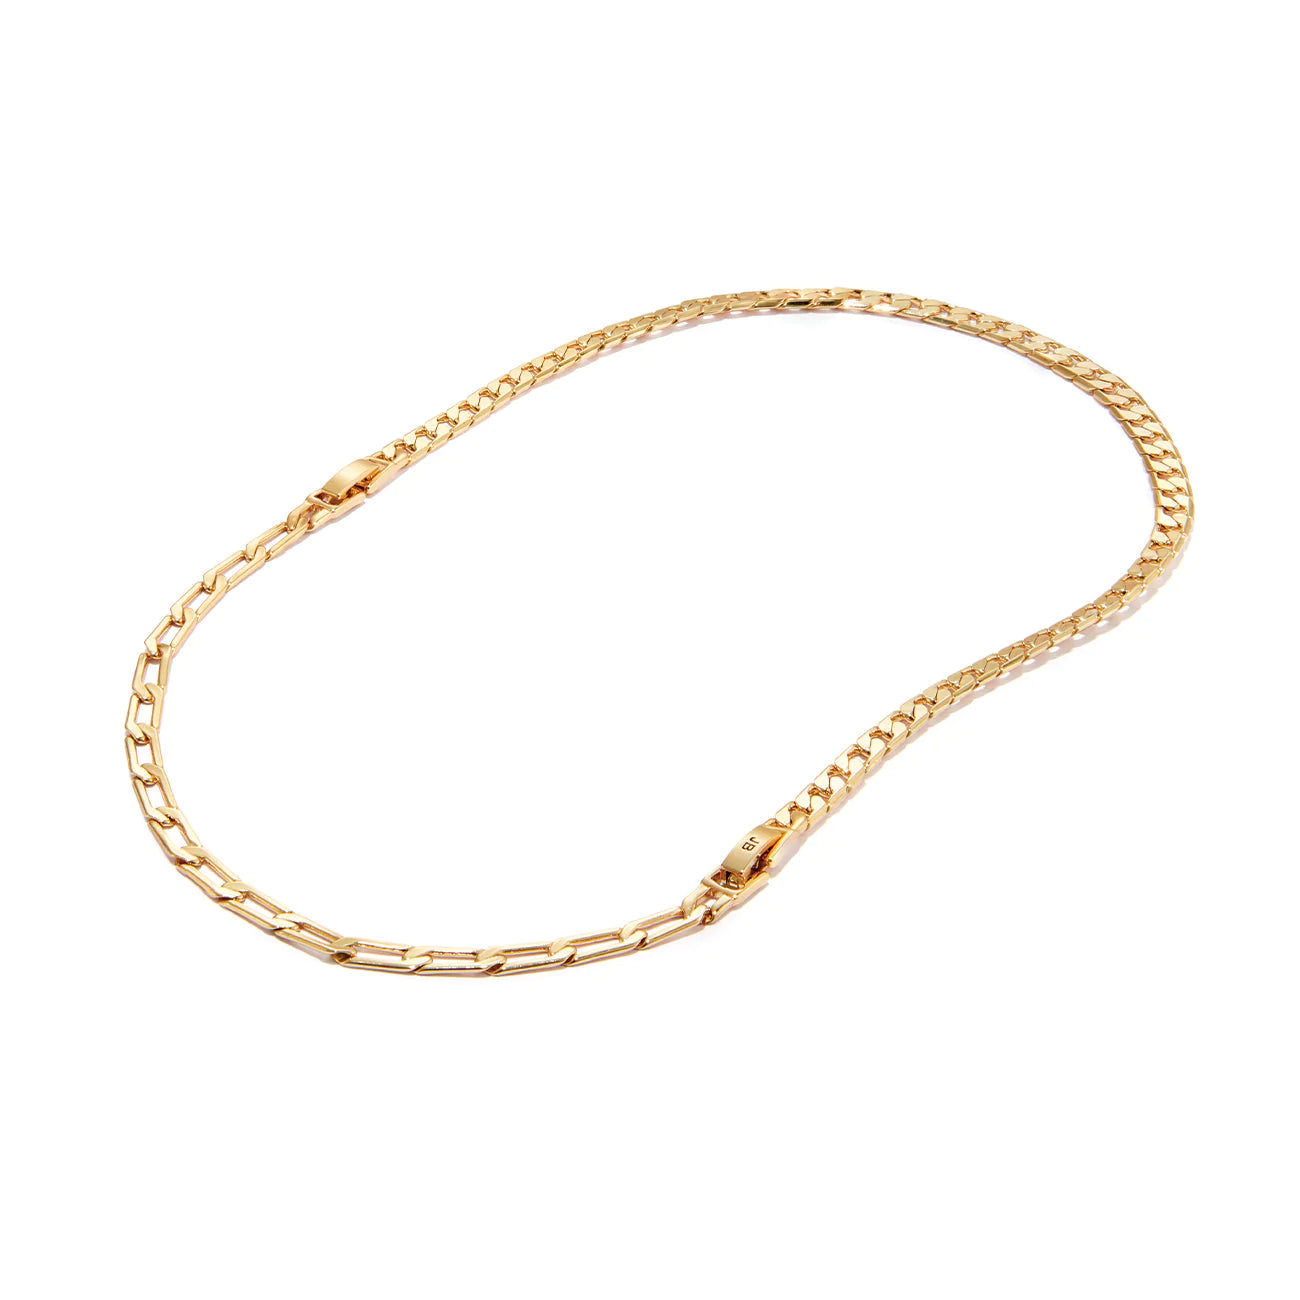 Brady Convertible Chain in Gold